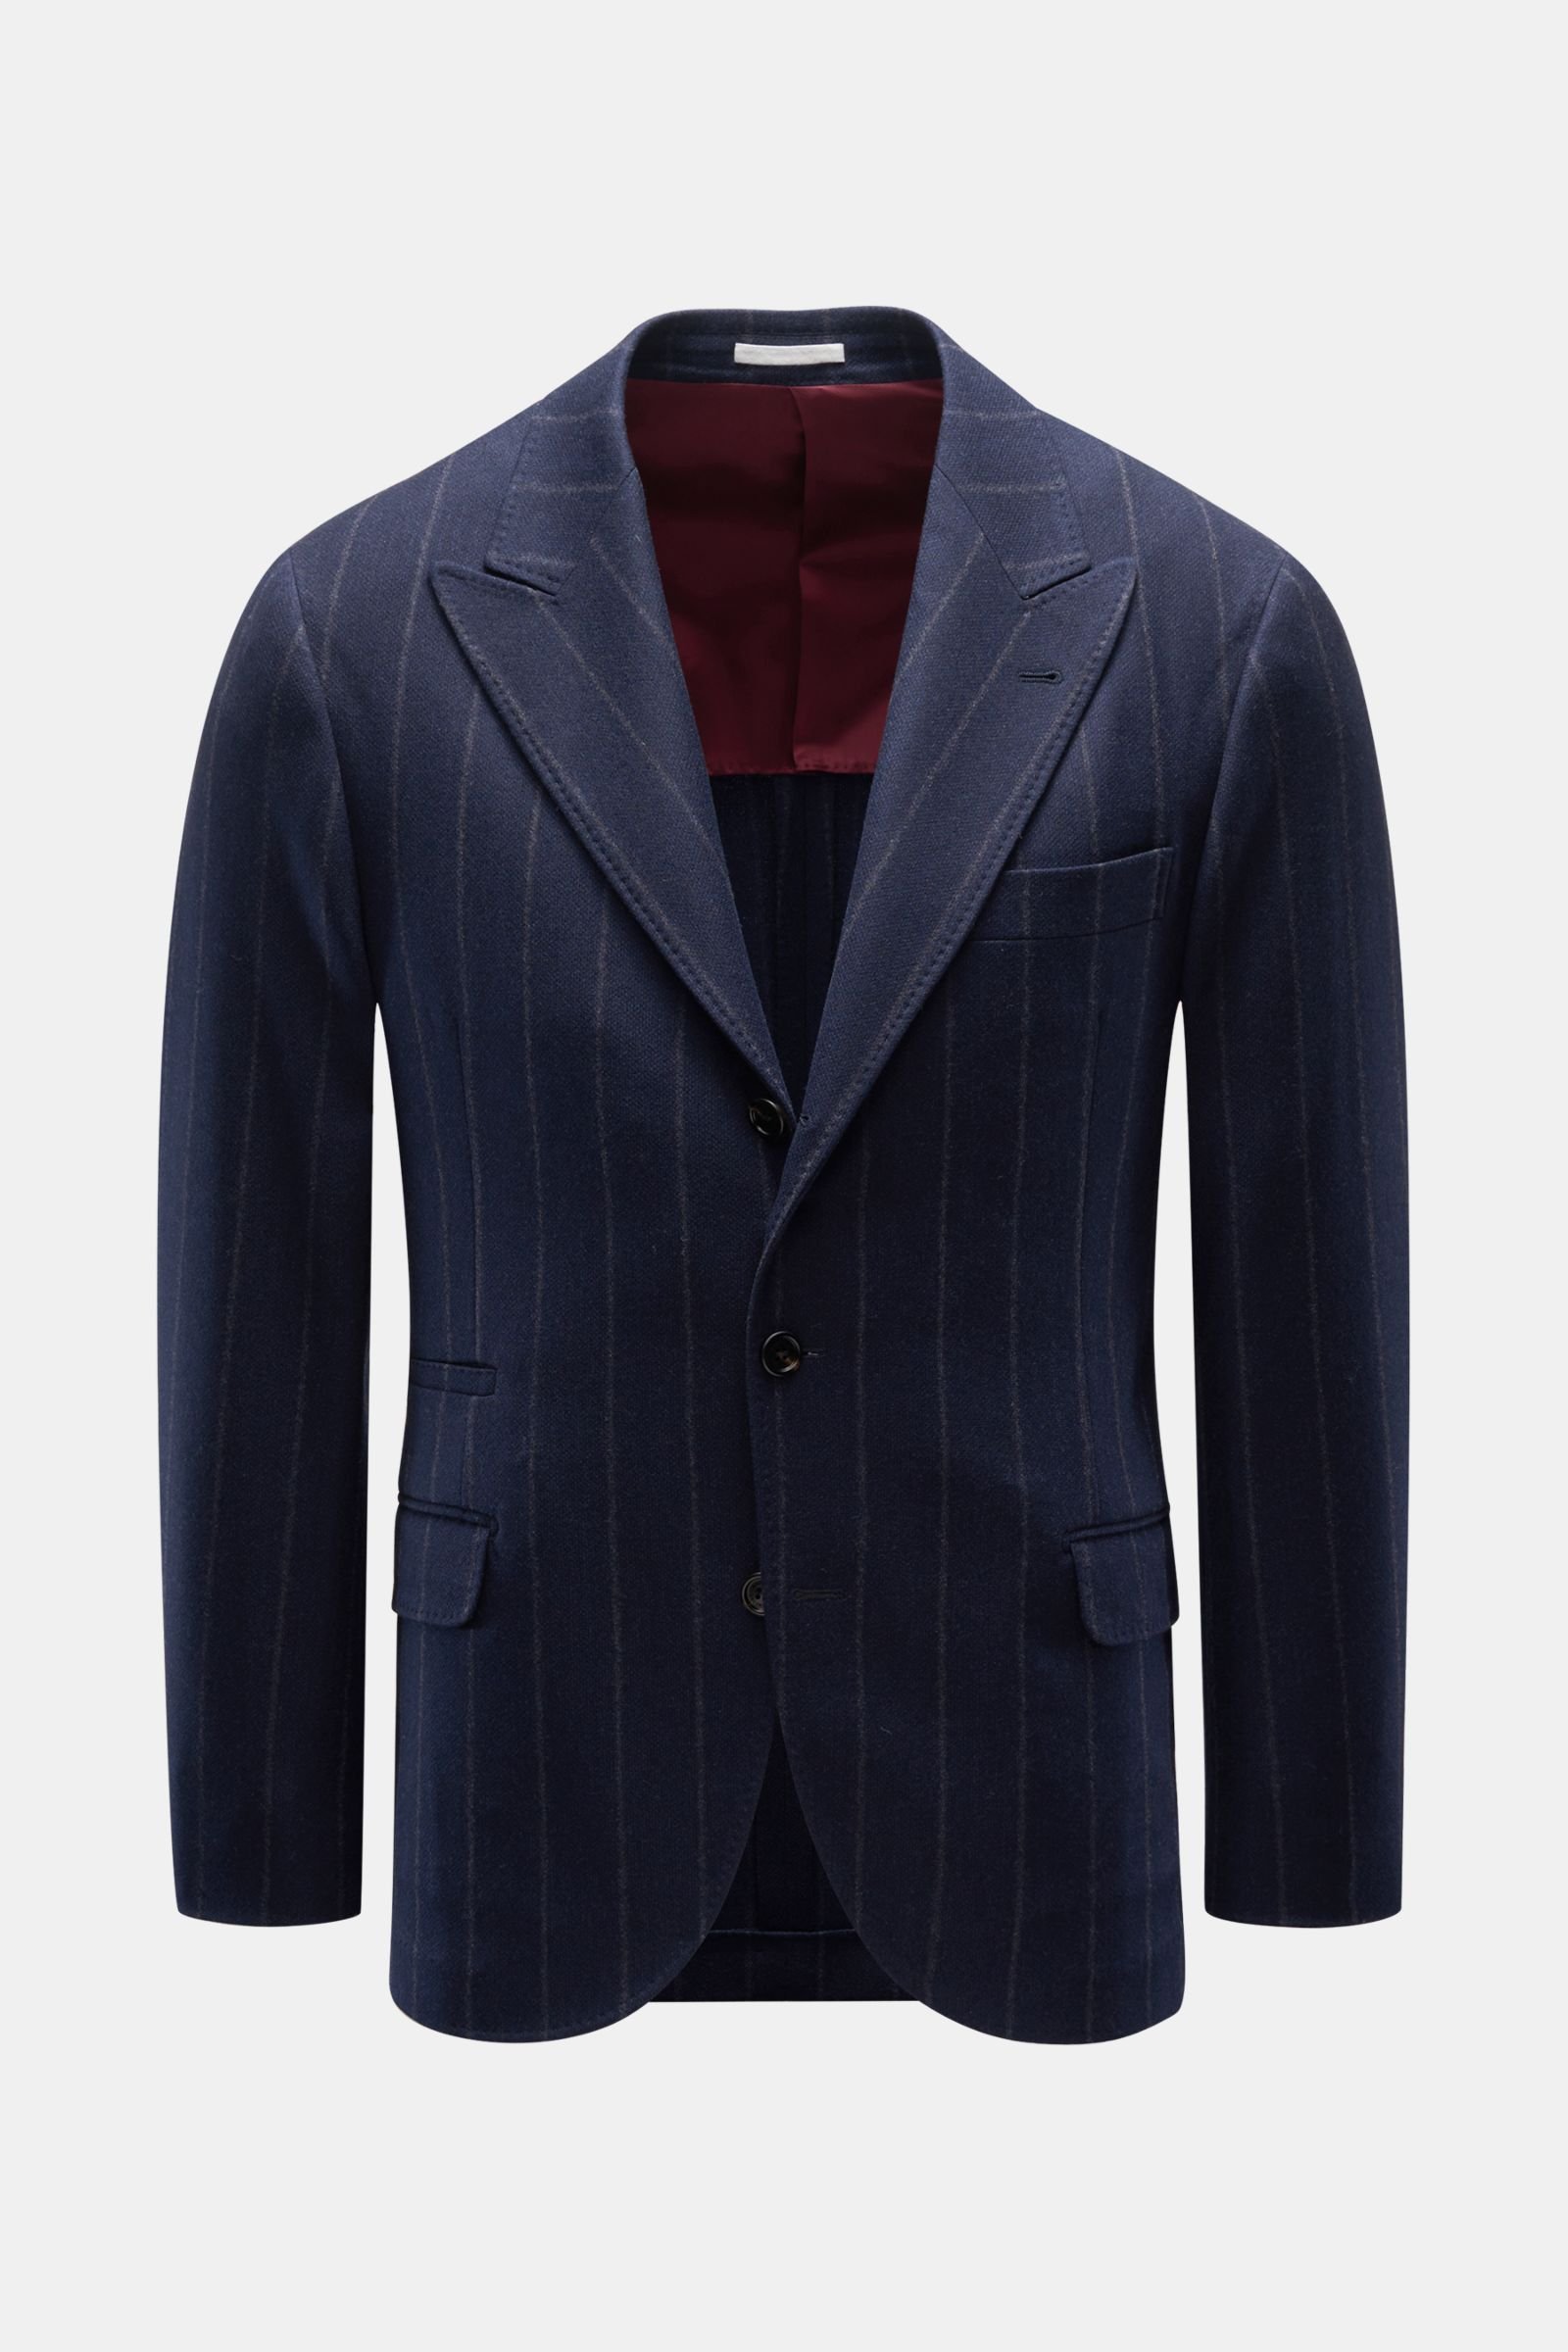 Smart-casual jacket navy striped